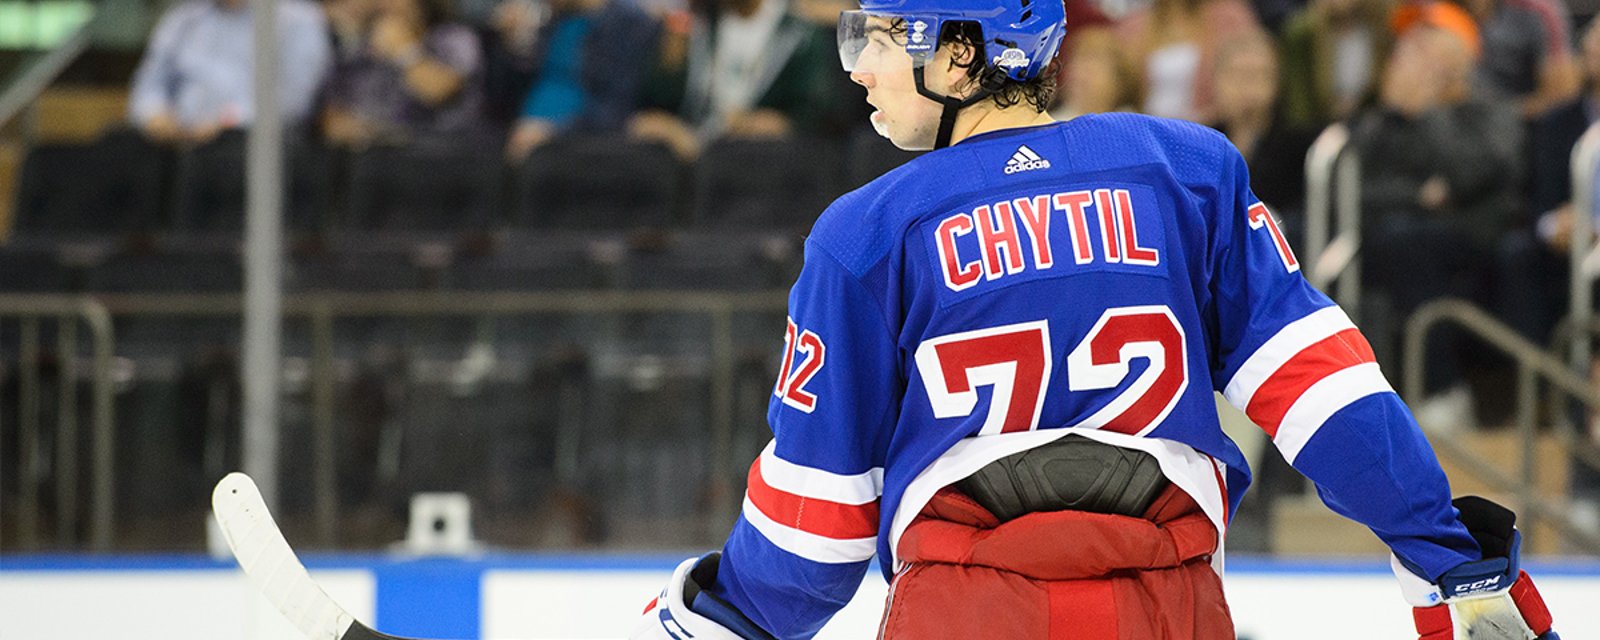 Report: Rangers make a decision on Chytil’s future